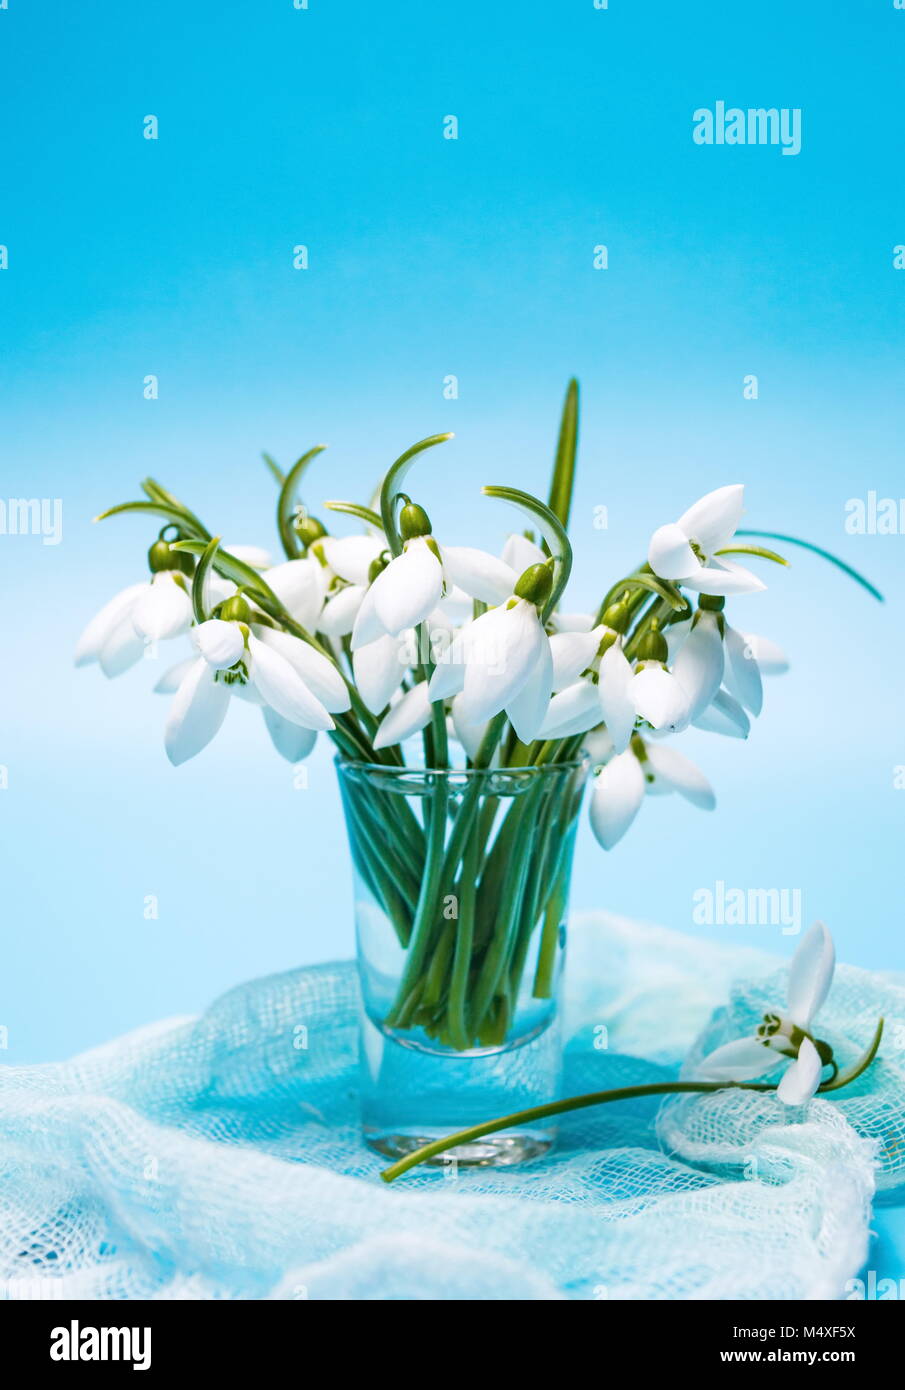 Snowdrop flowers in a vase against blue background Stock Photo